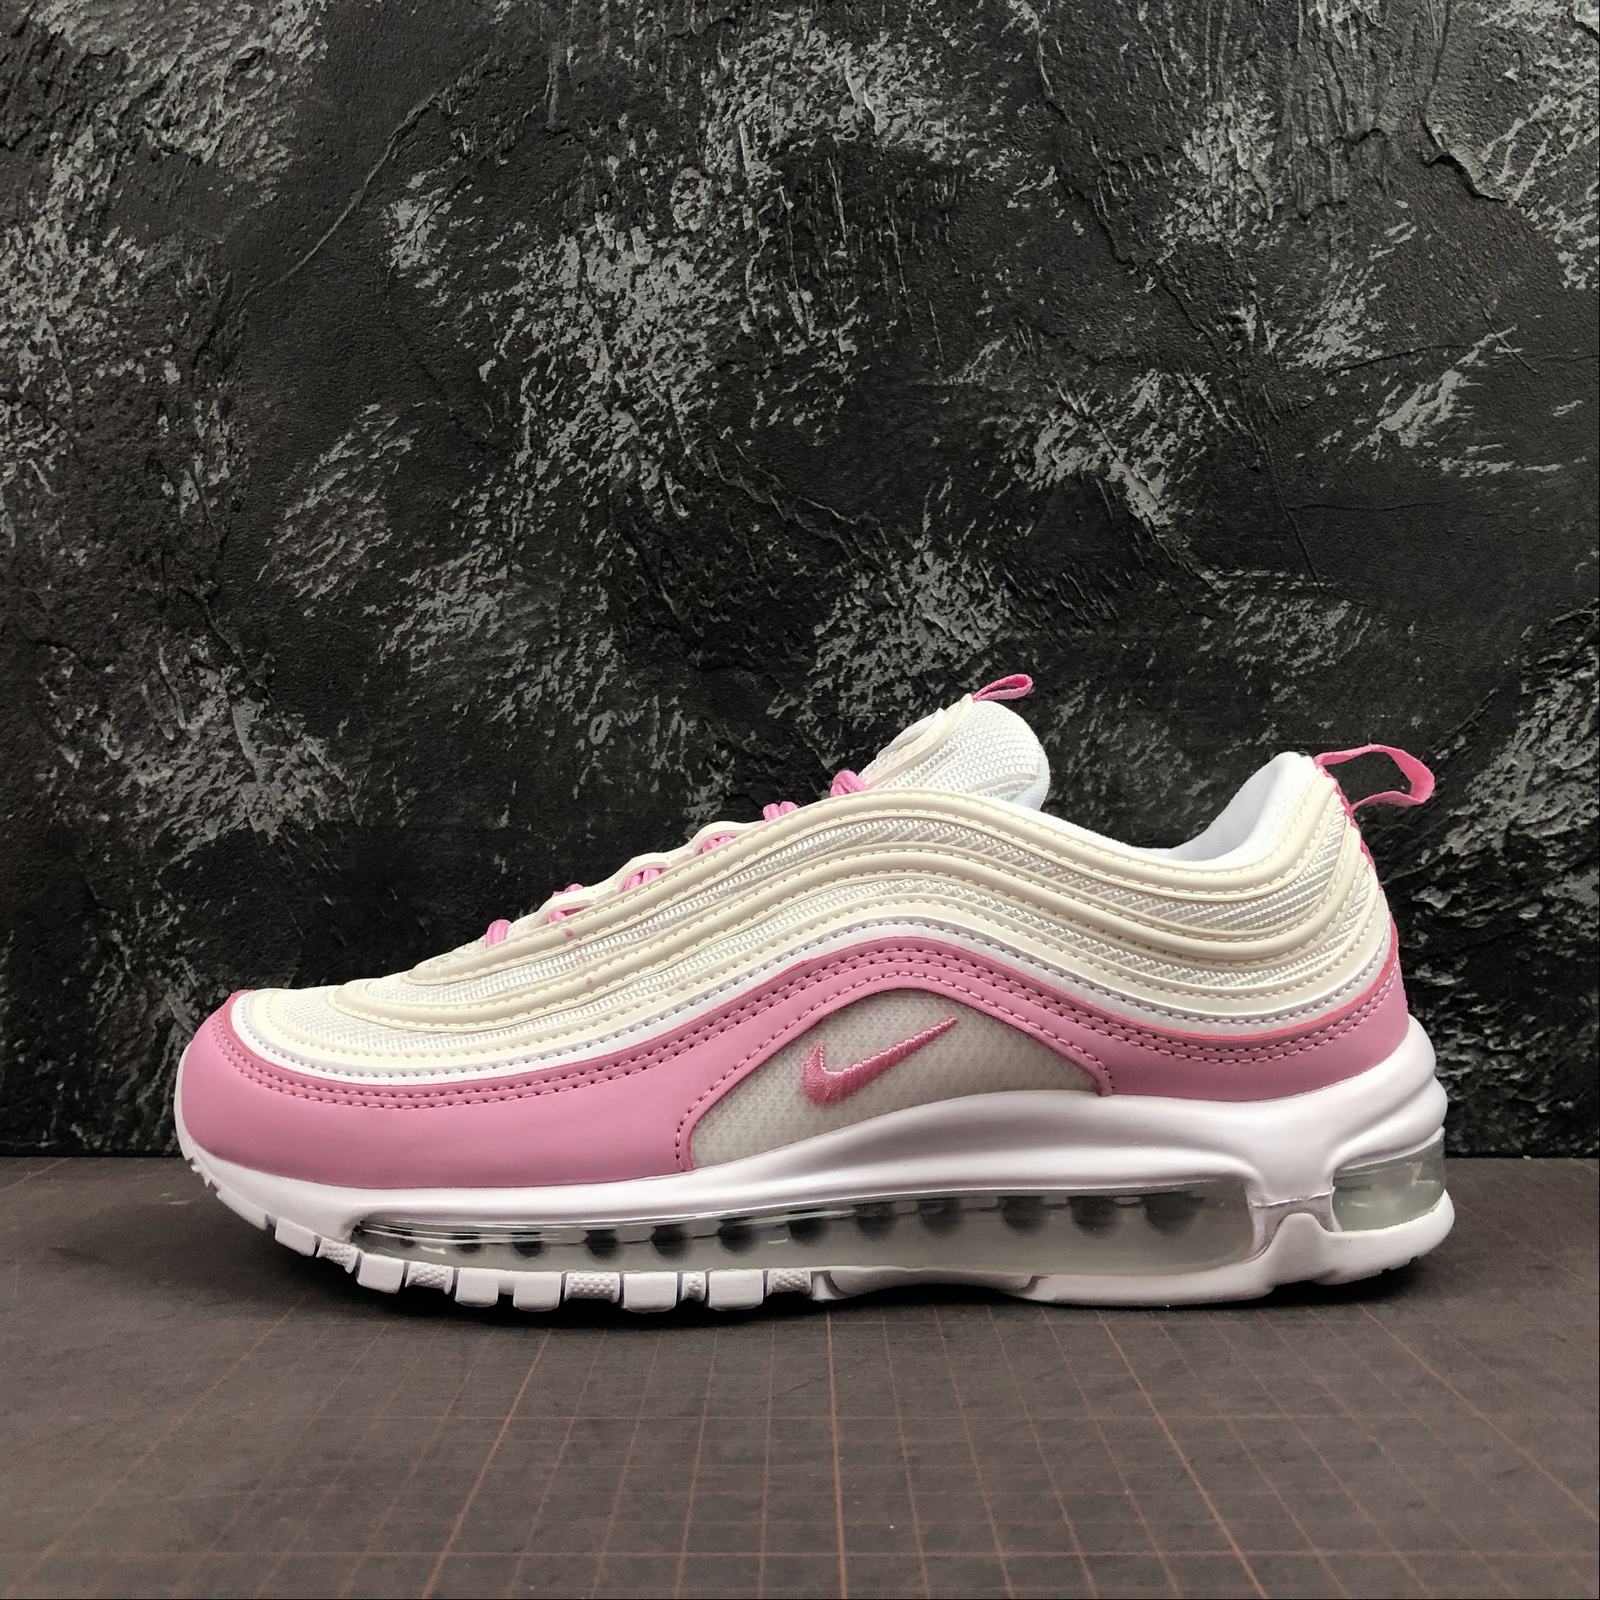 Nike Air Max 97 GS White/Psychic Pink 